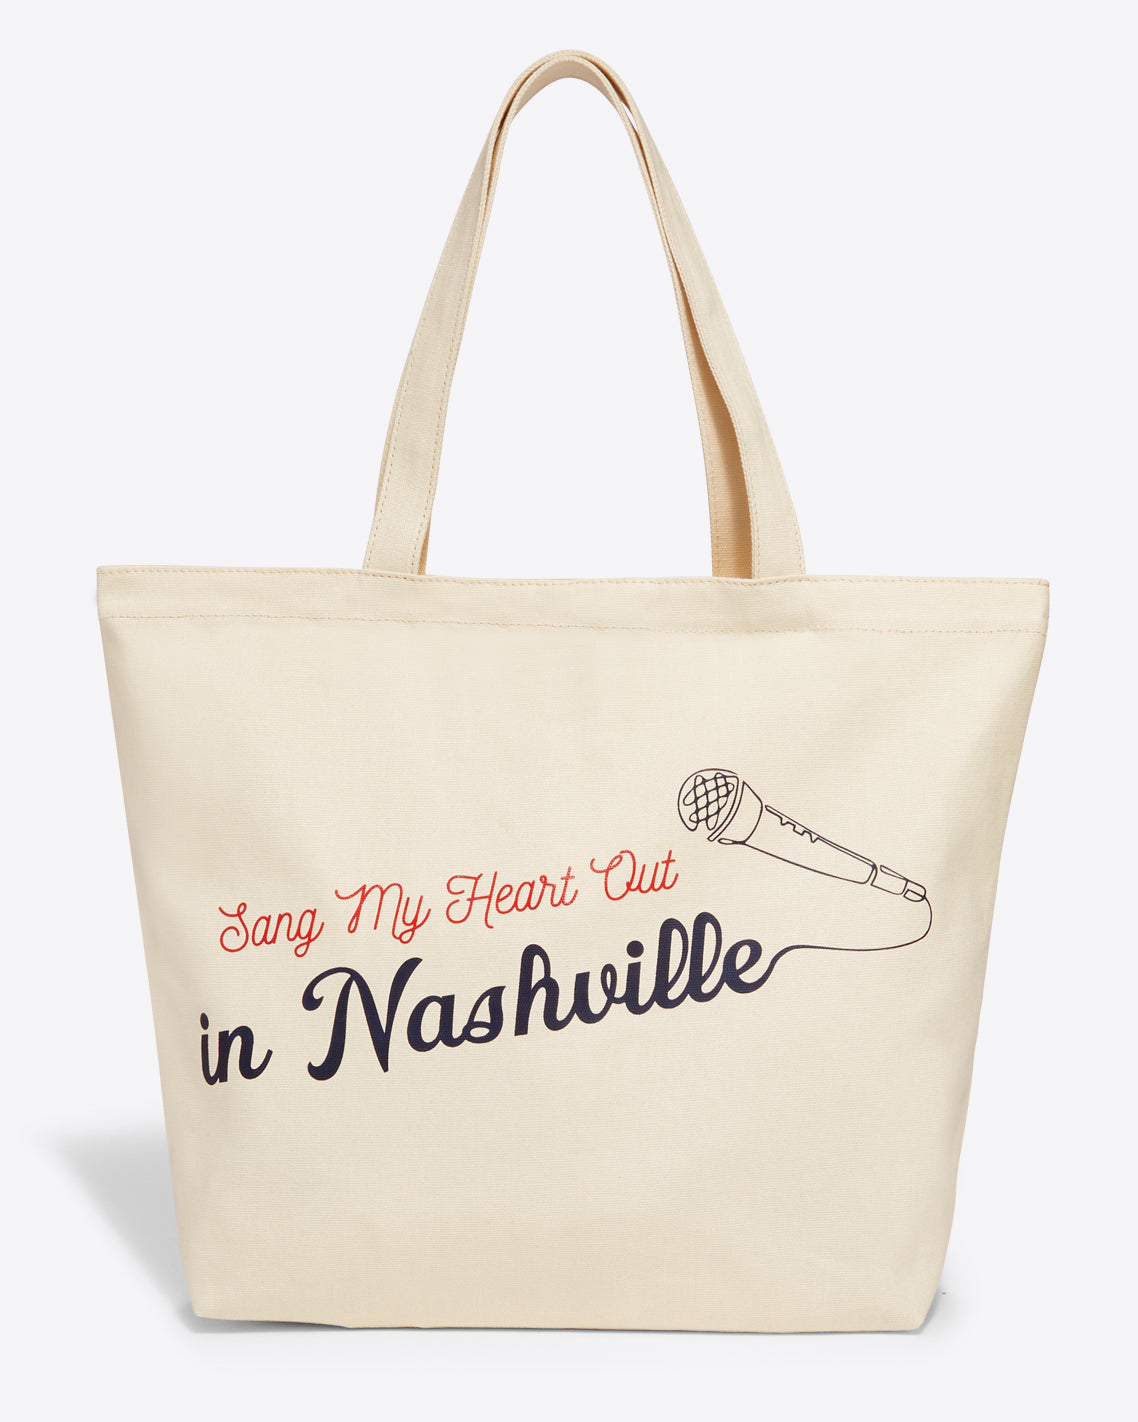 Draper James Sang My Heart Out in Nashville Canvas Tote Bag in Color Magnolia White